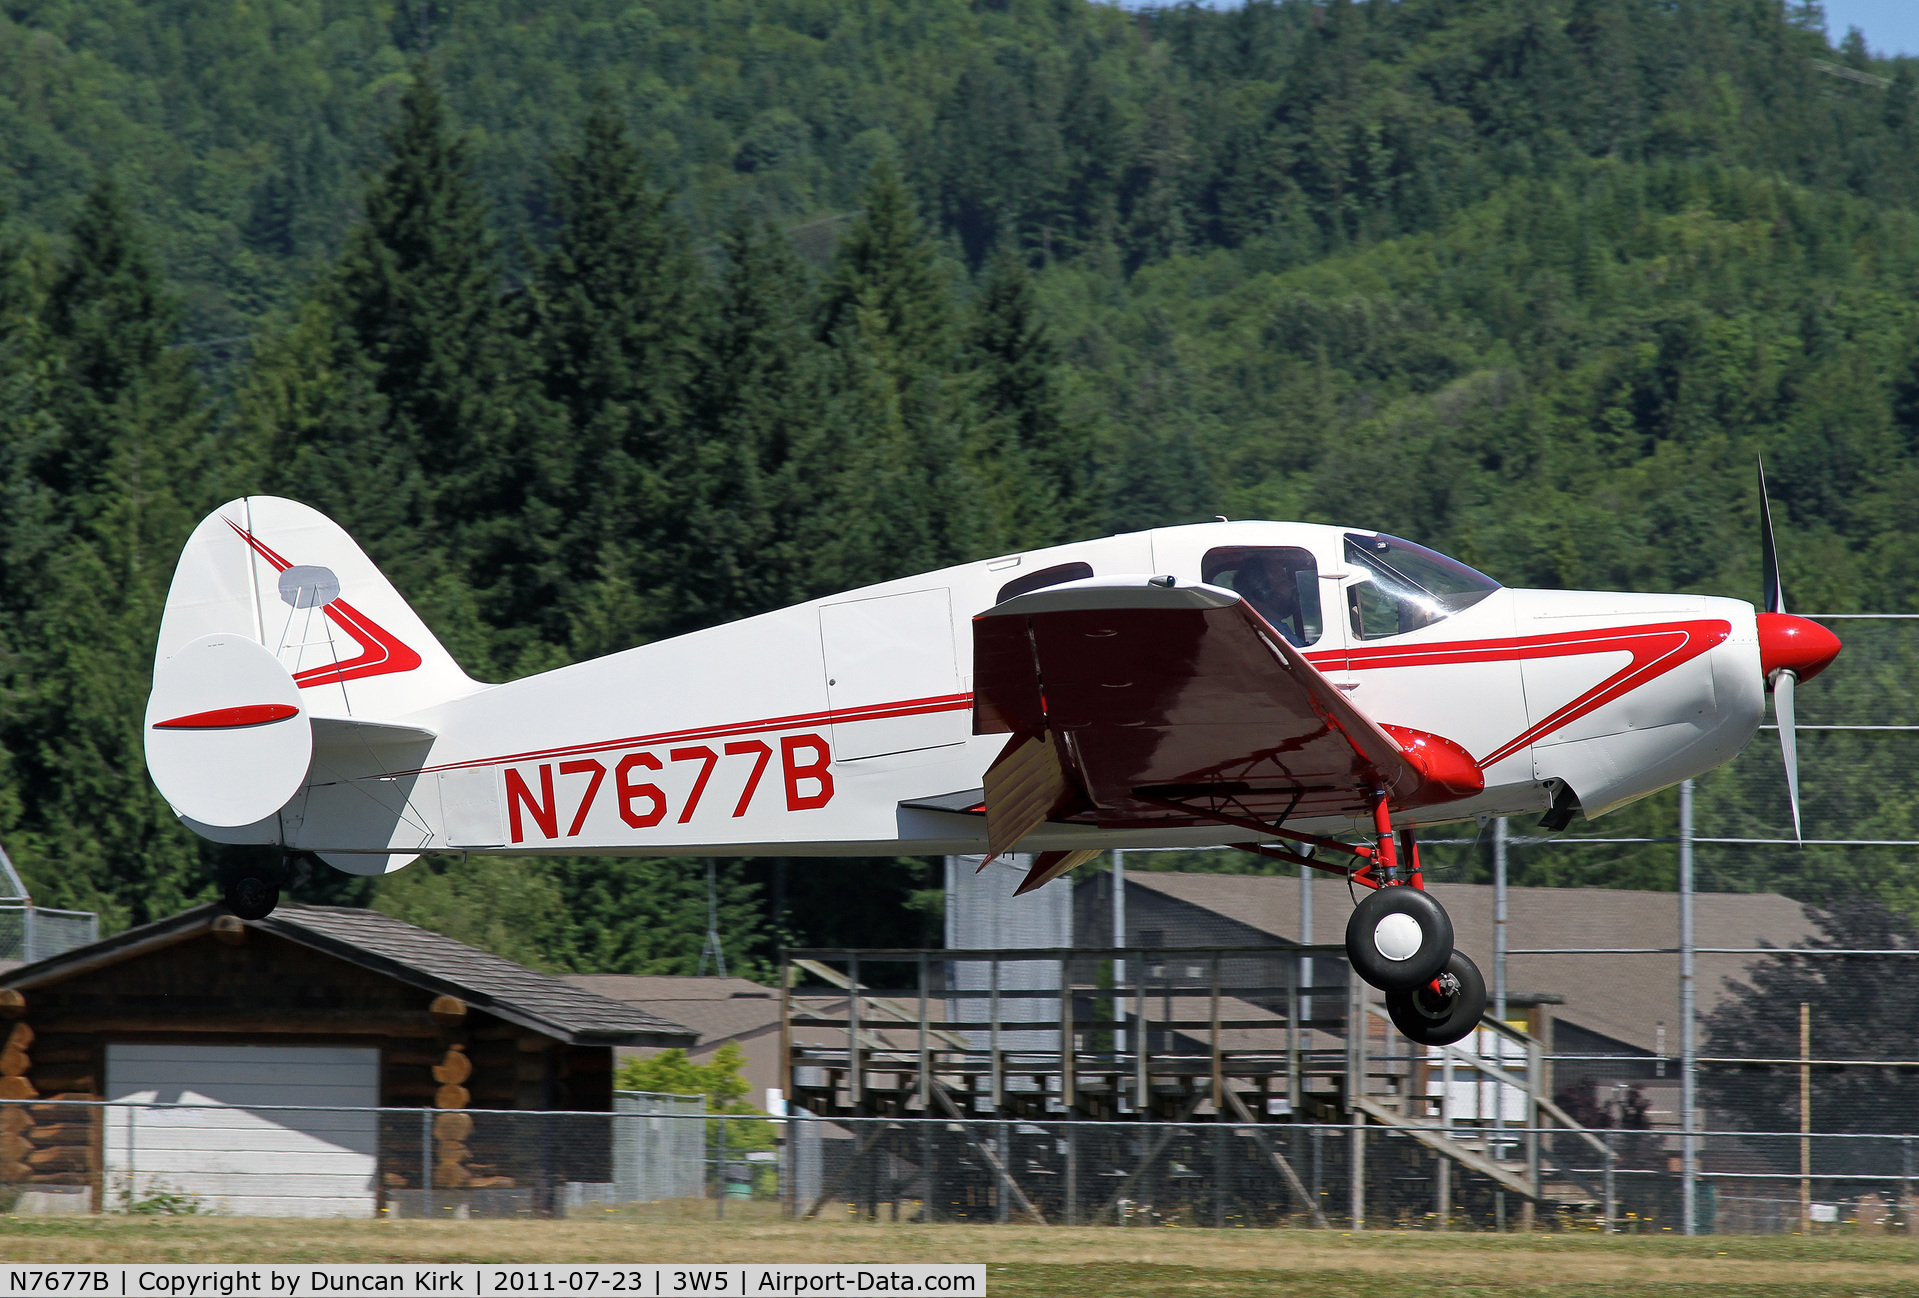 N7677B, 1957 Bellanca 14-19-2 Cruisair Senior C/N 4028, Arriving on a sunny day at the fly-in